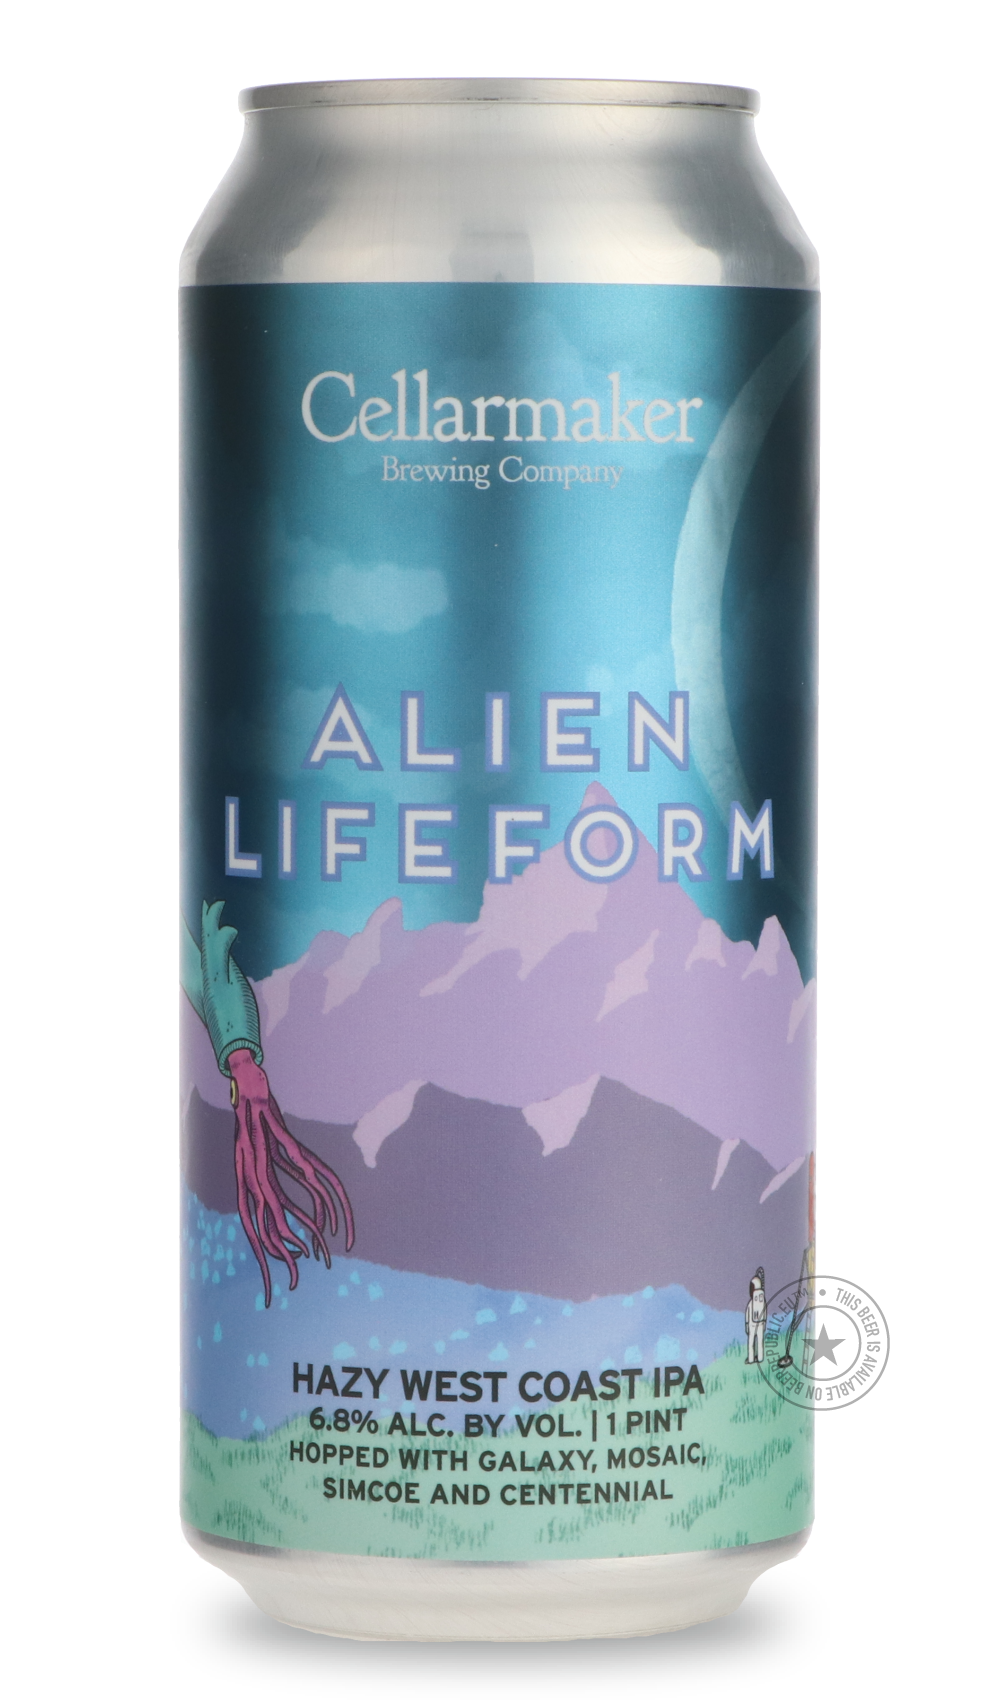 -Cellarmaker- Alien Life Form-IPA- Only @ Beer Republic - The best online beer store for American & Canadian craft beer - Buy beer online from the USA and Canada - Bier online kopen - Amerikaans bier kopen - Craft beer store - Craft beer kopen - Amerikanisch bier kaufen - Bier online kaufen - Acheter biere online - IPA - Stout - Porter - New England IPA - Hazy IPA - Imperial Stout - Barrel Aged - Barrel Aged Imperial Stout - Brown - Dark beer - Blond - Blonde - Pilsner - Lager - Wheat - Weizen - Amber - Bar